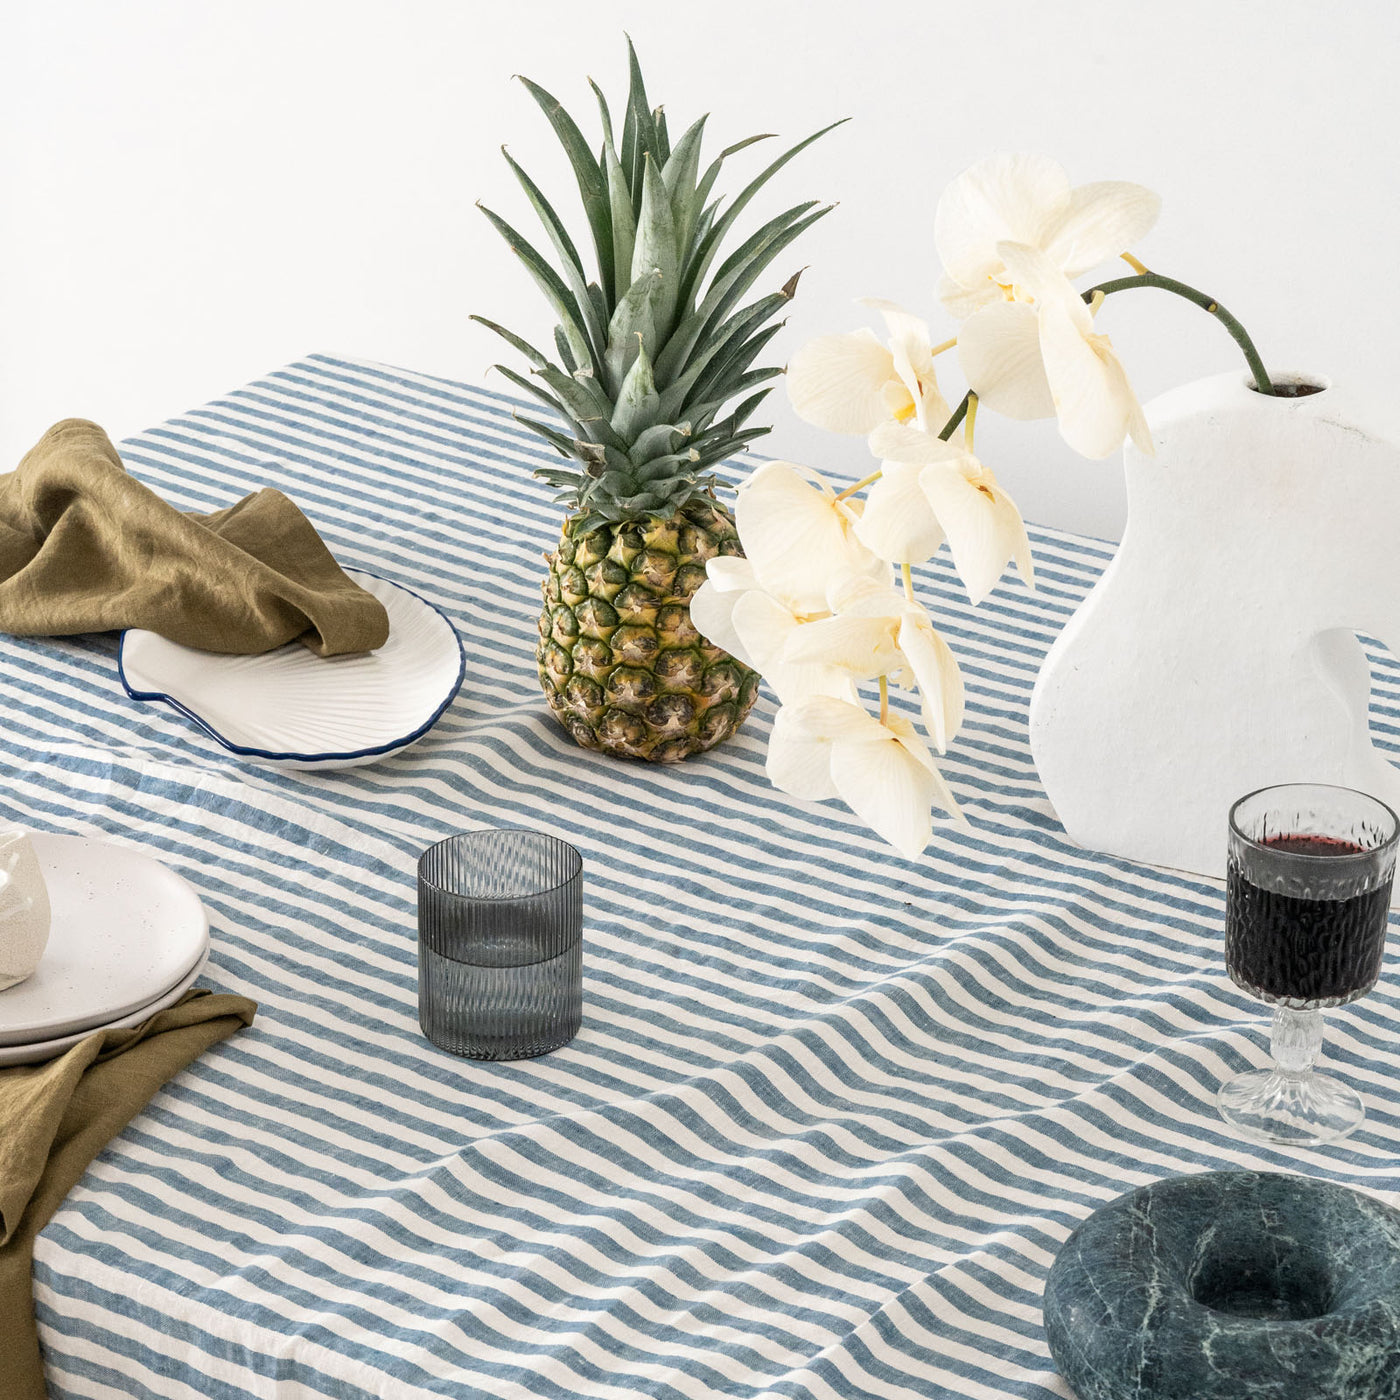 French Flax Linen Table Cloth in Marine Blue Stripe